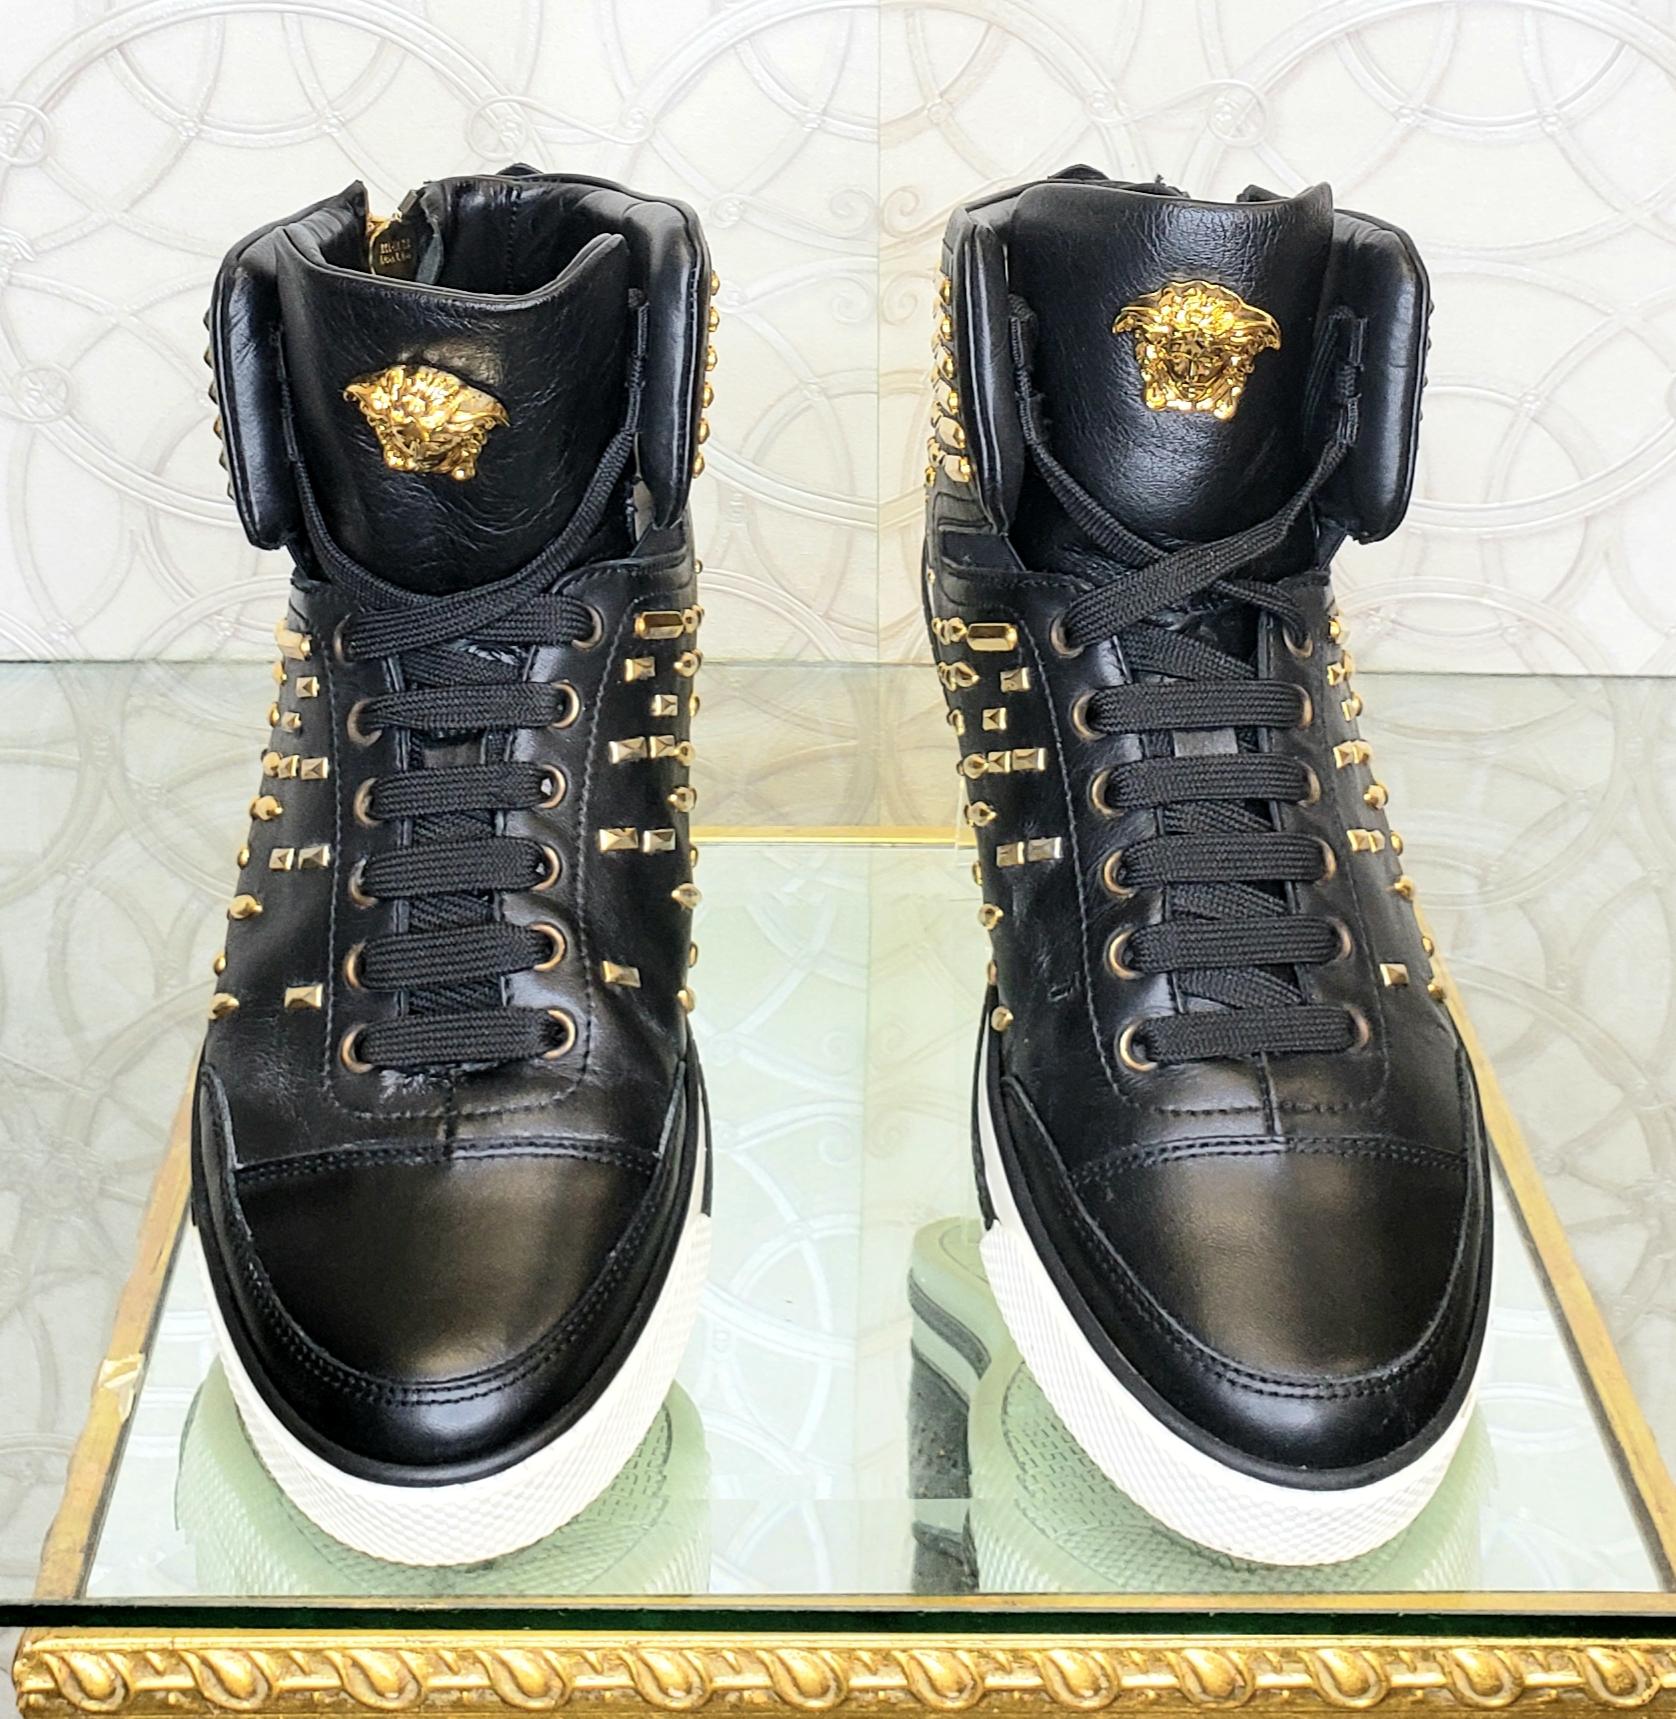 VERSACE STUDDED HIGH-TOP SNEAKERS with GOLD MEDUSA side ZIPPER at 1stDibs